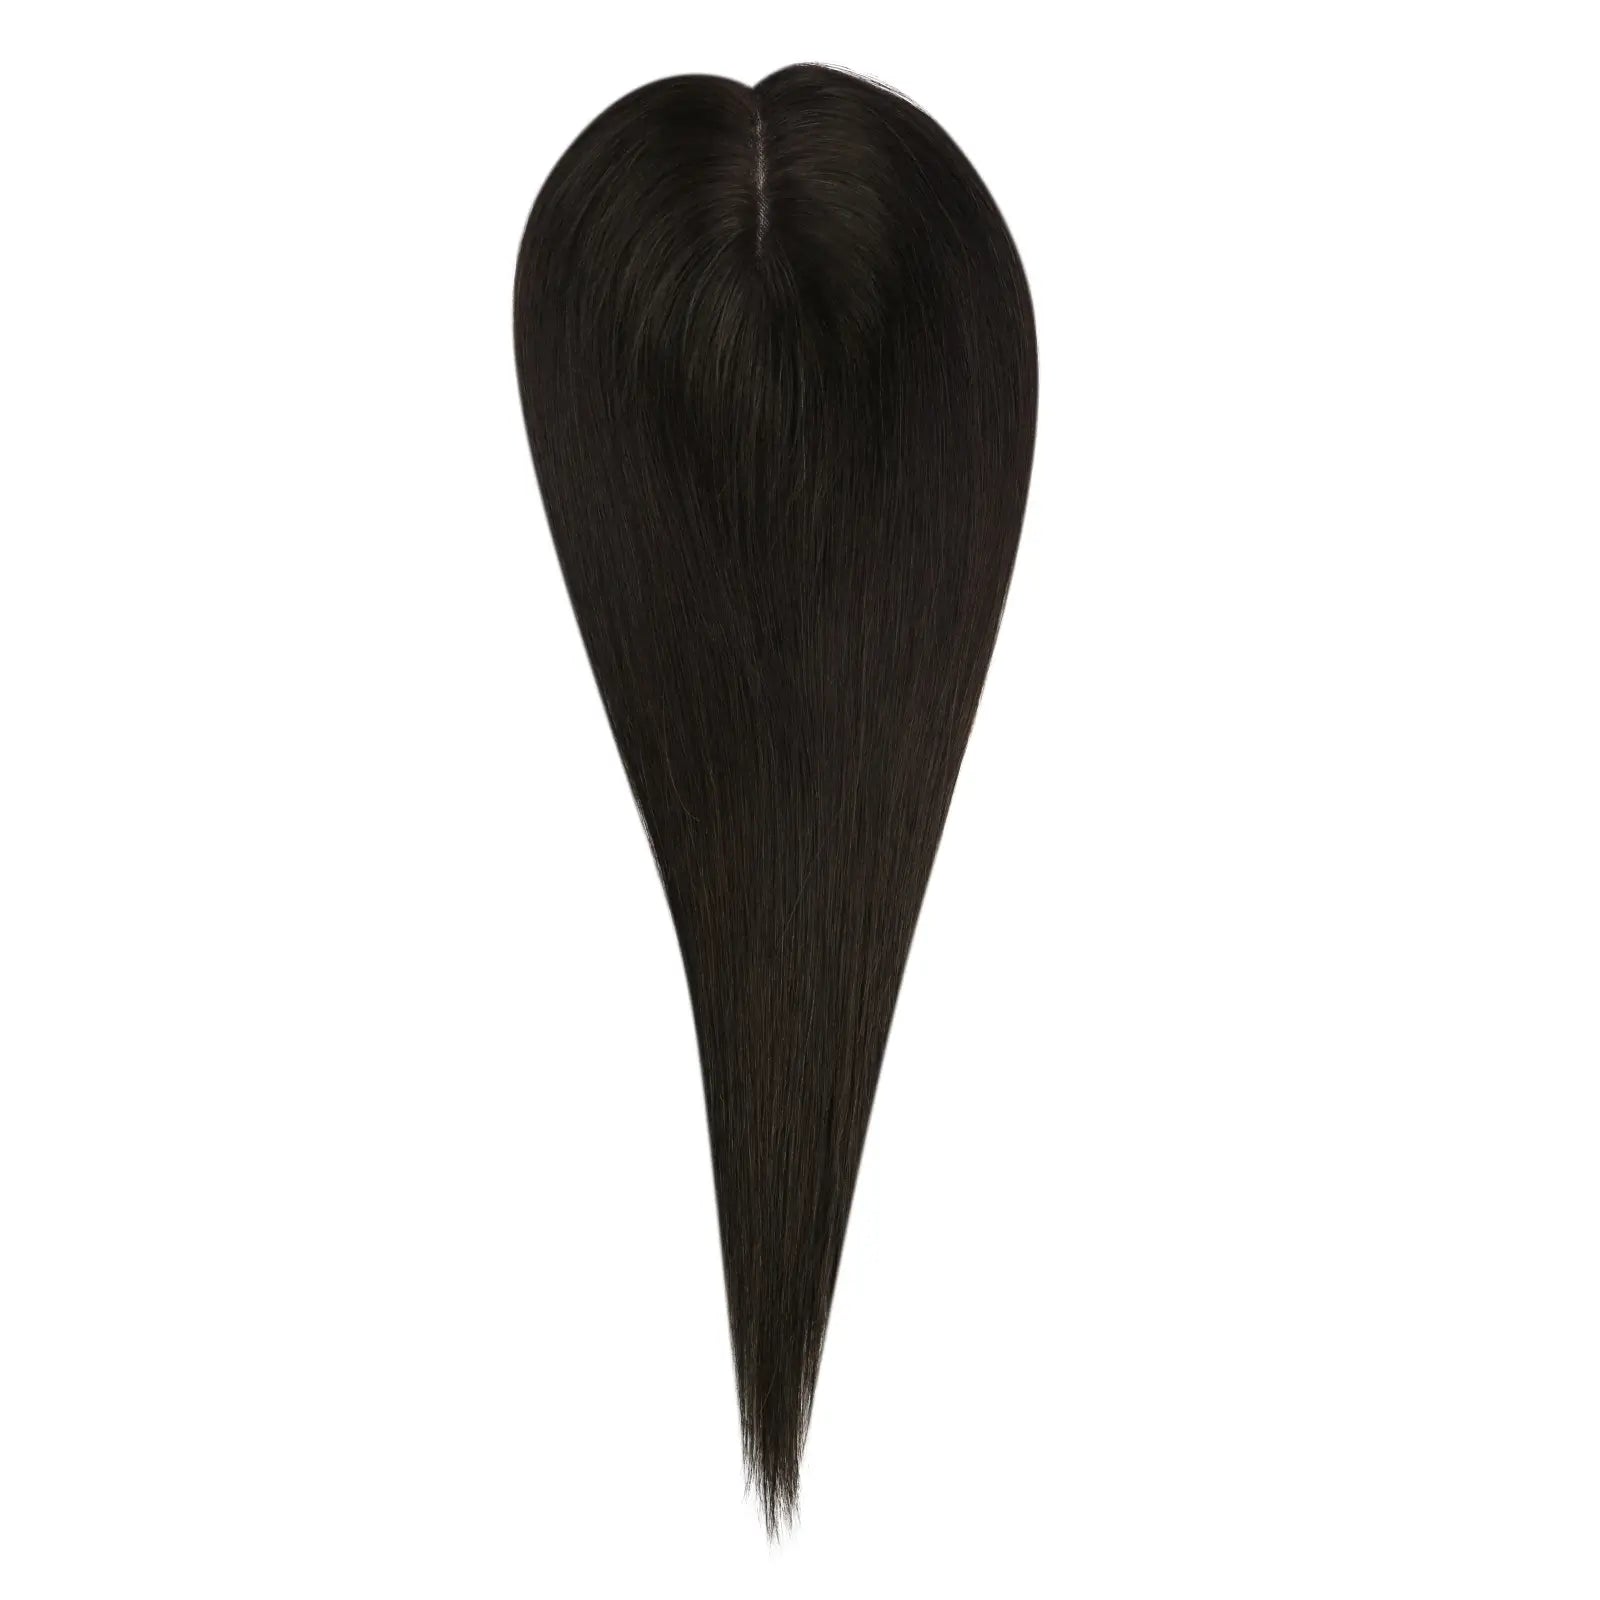 100% real huamn hairpieces off black for women